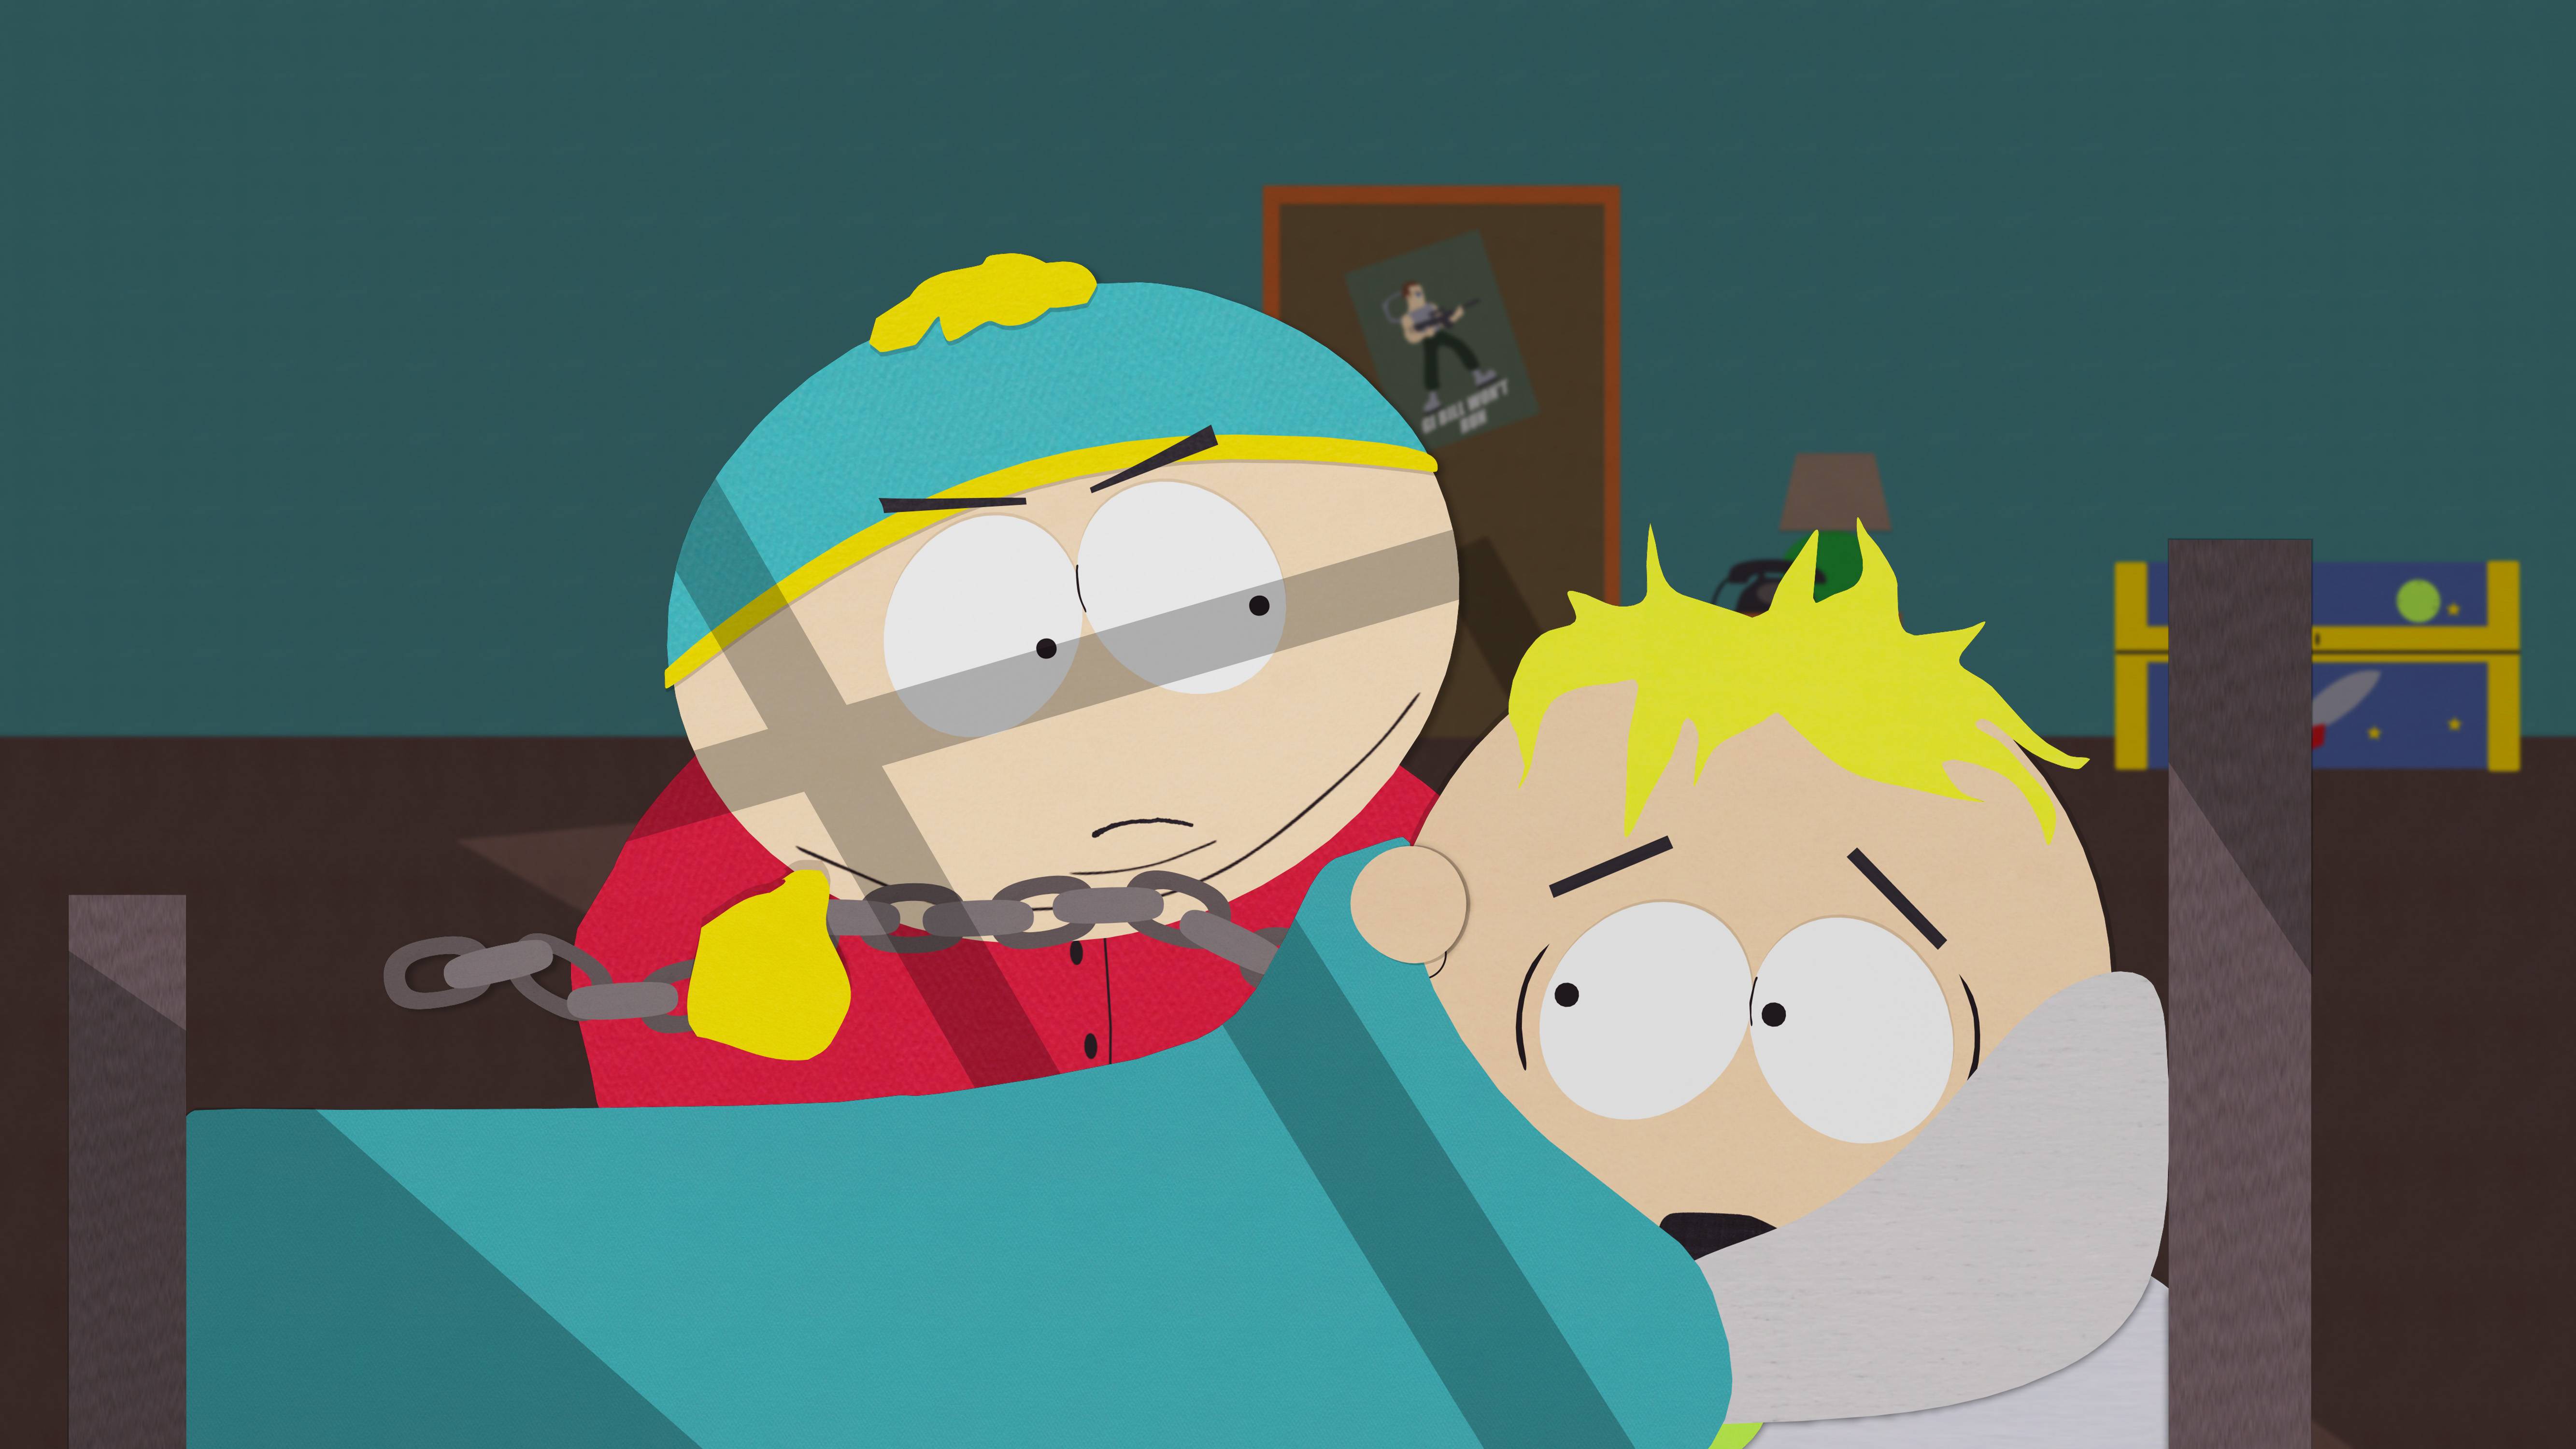 darryl foo recommends pictures of cartman from south park pic